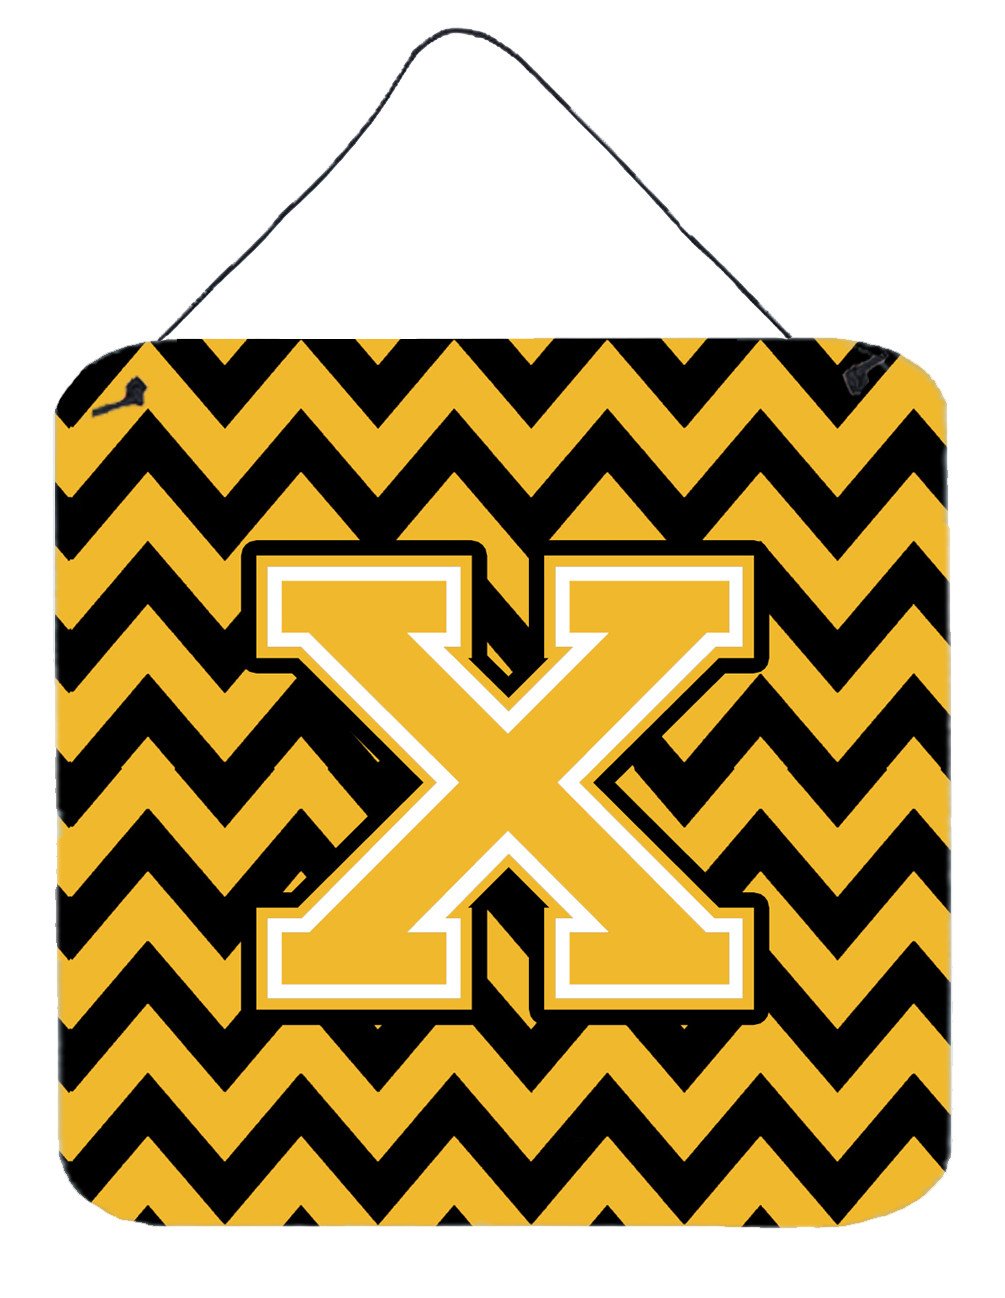 Letter X Chevron Black and Gold Wall or Door Hanging Prints CJ1053-XDS66 by Caroline's Treasures